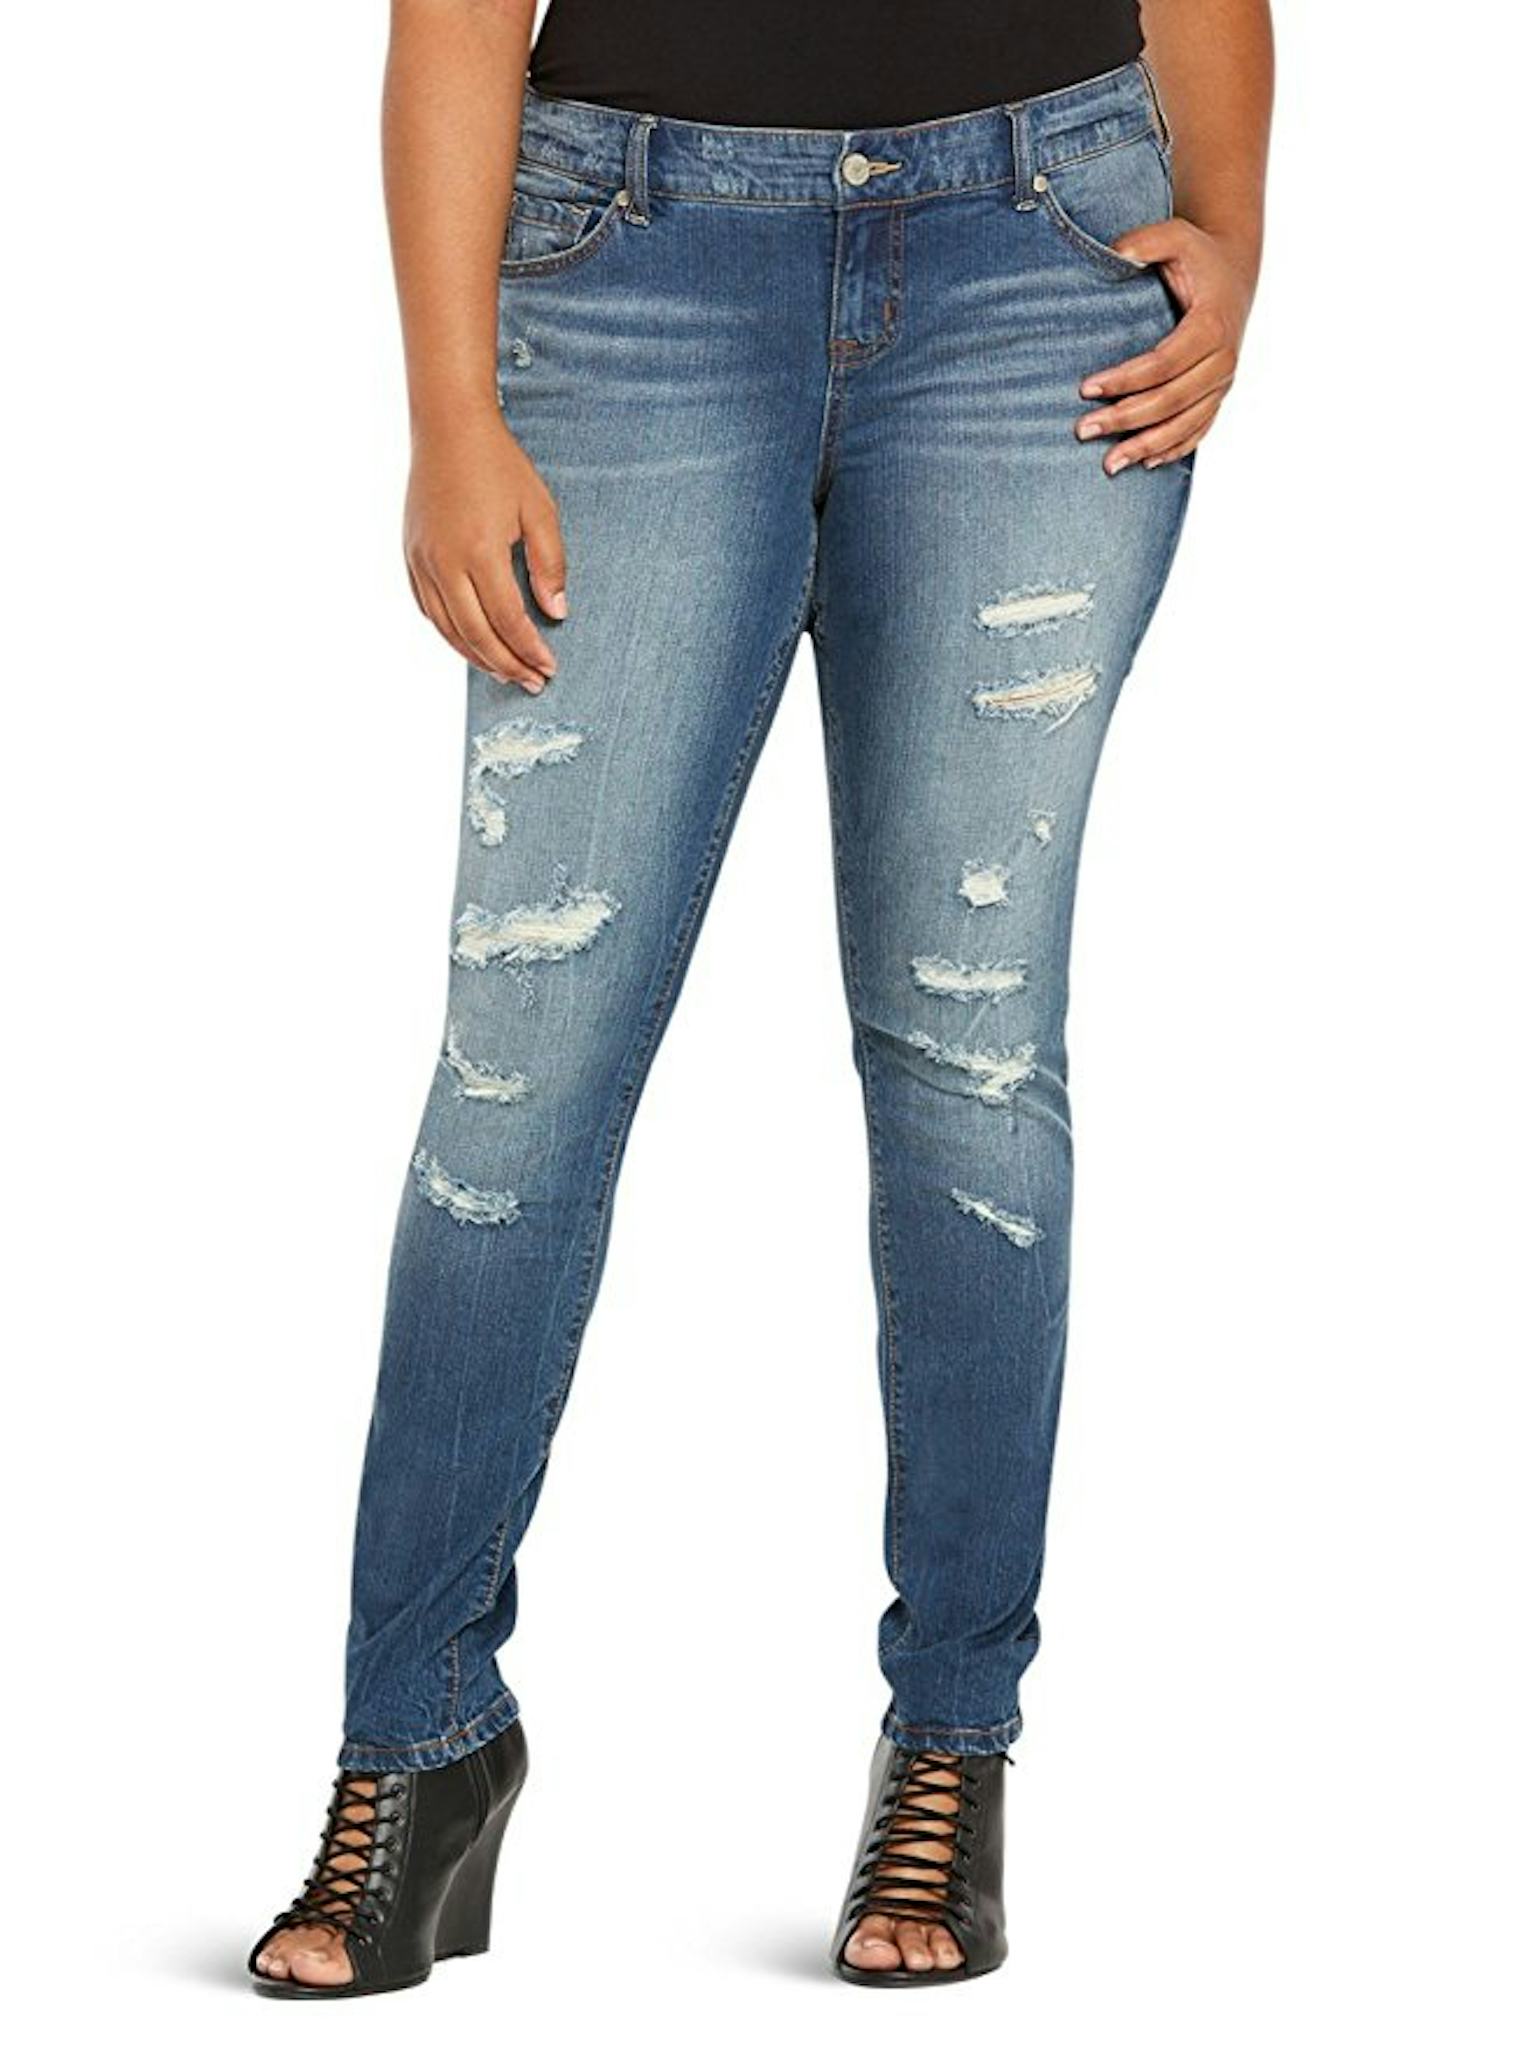 15 Plus Size Jeans Size 26 & Up For Every Style